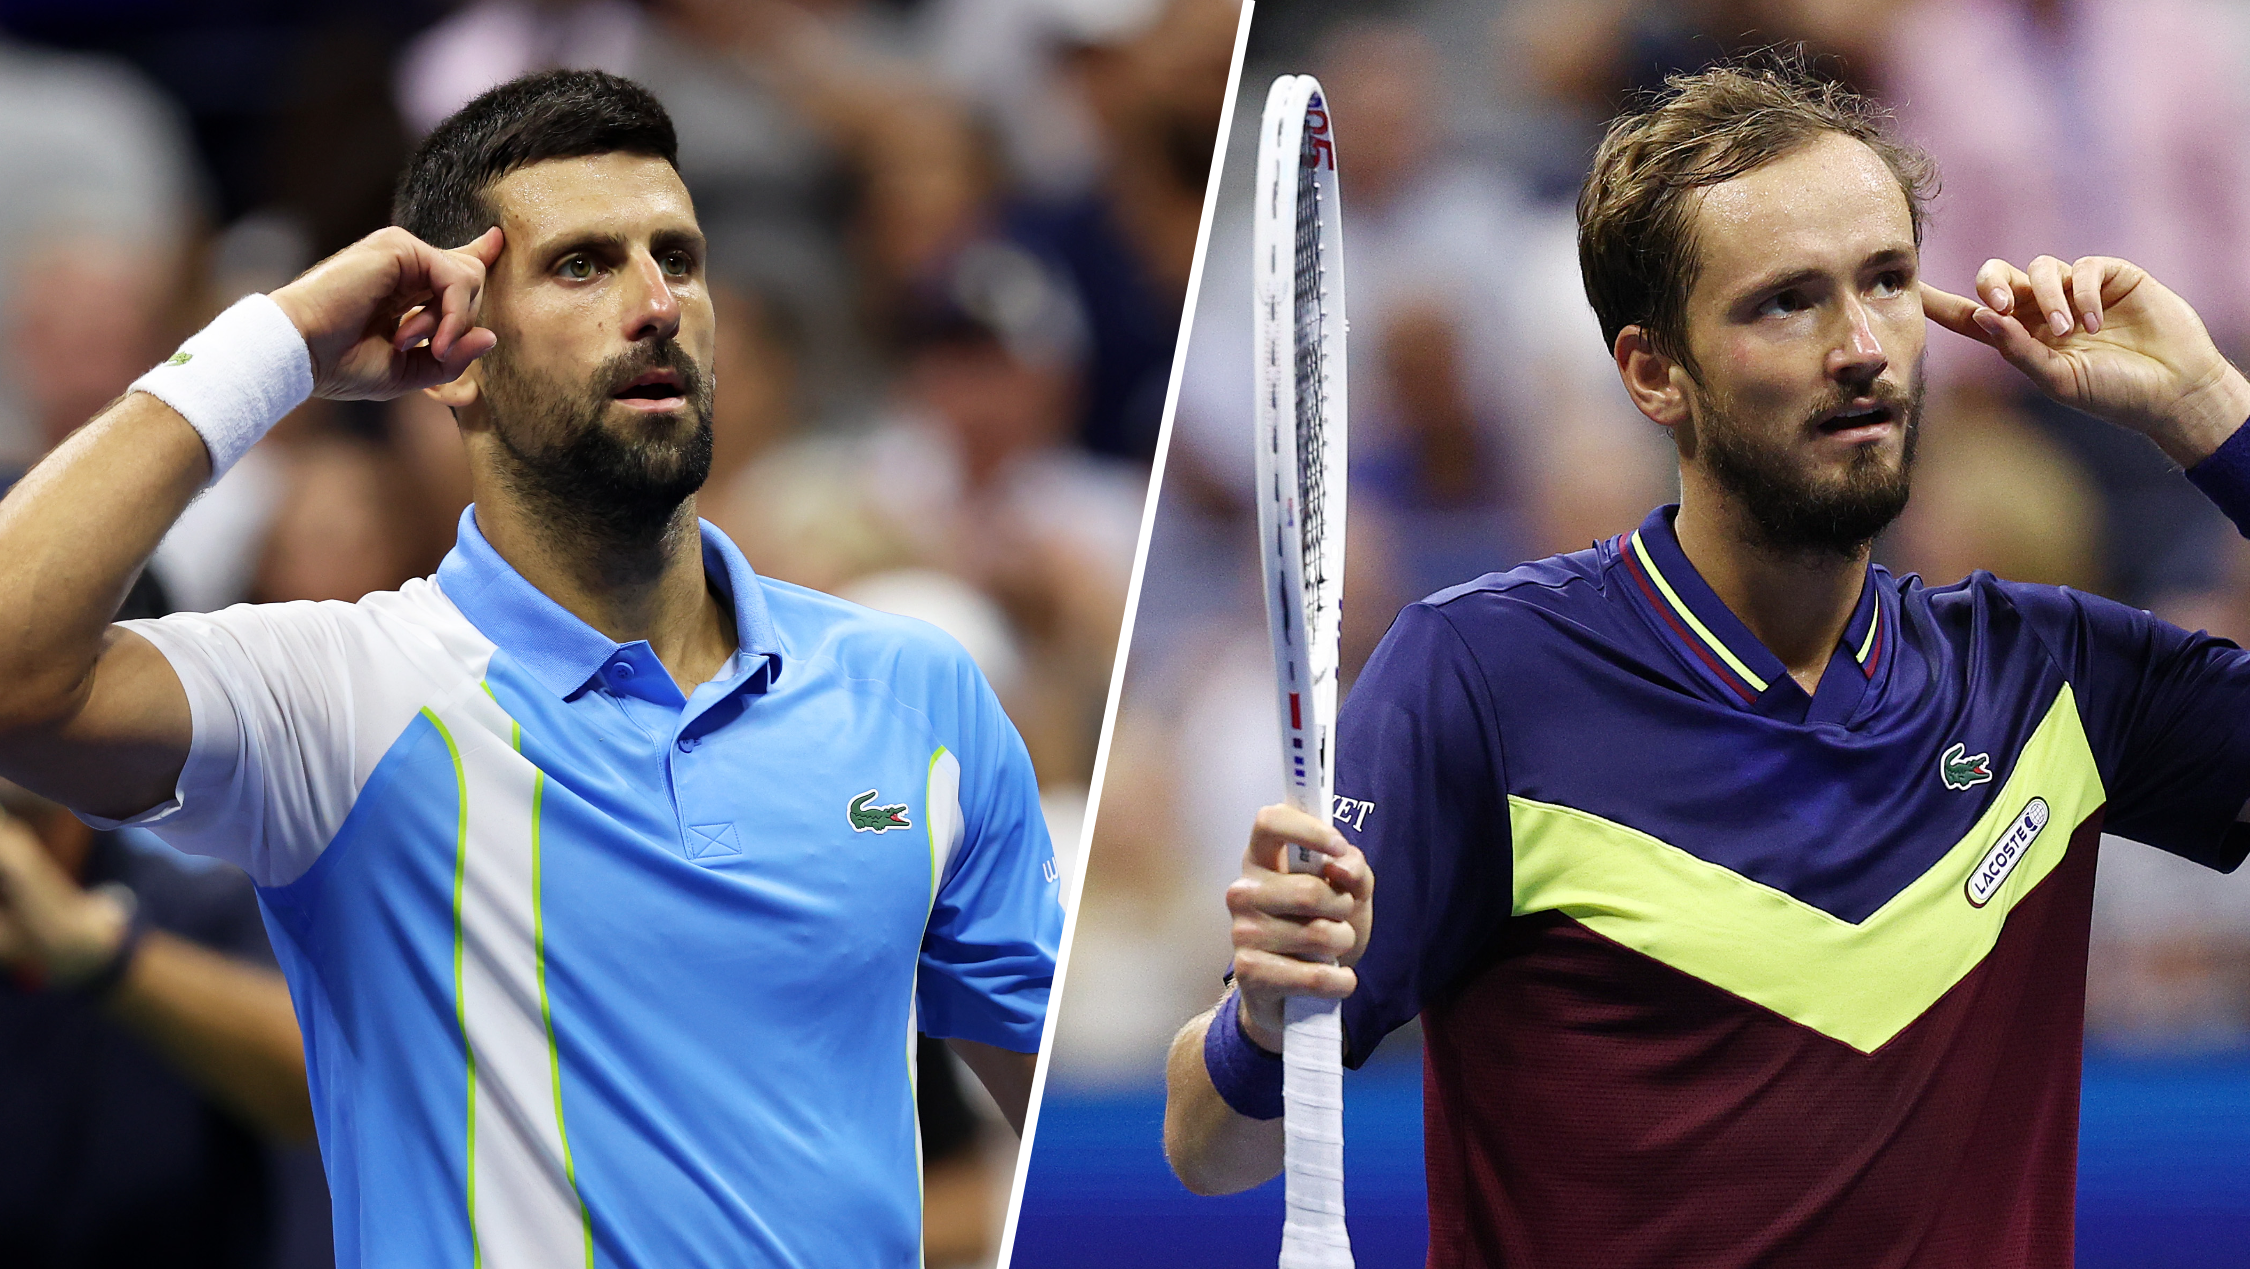 How to watch the 2023 US Open mens final